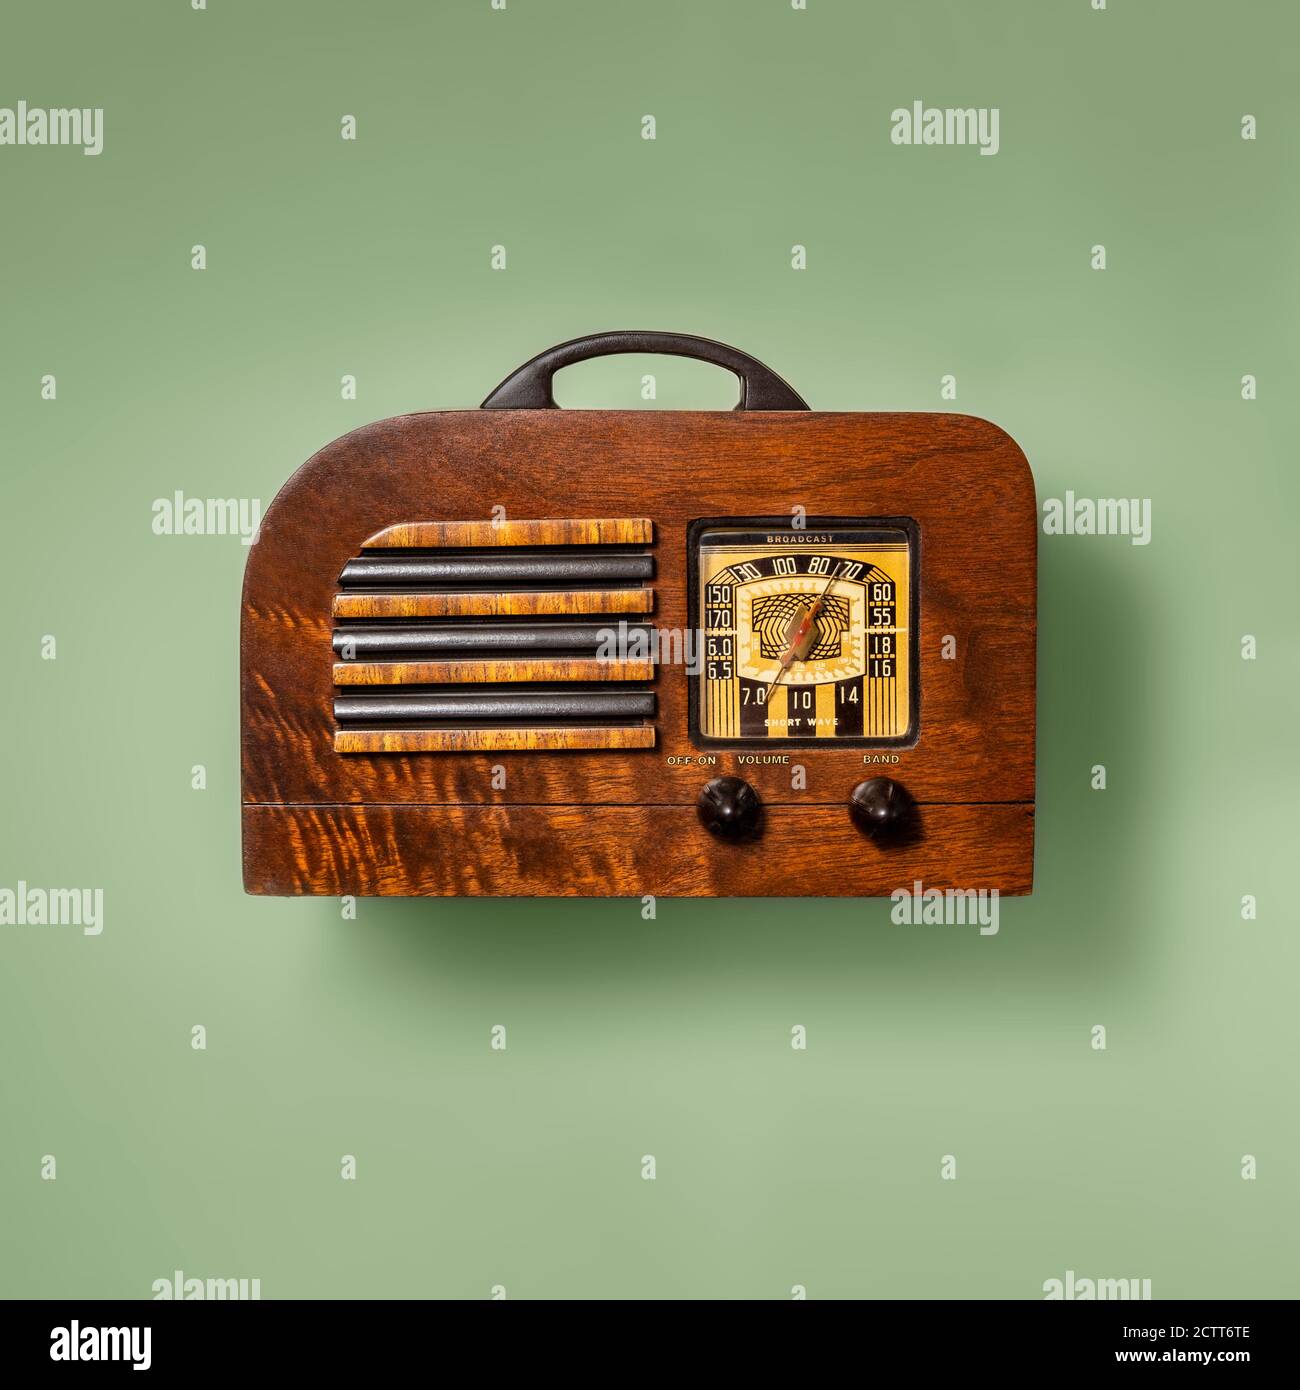 Antique Radio with Antenna on a Green Background Stock Photo - Image of  communication, audio: 182336980